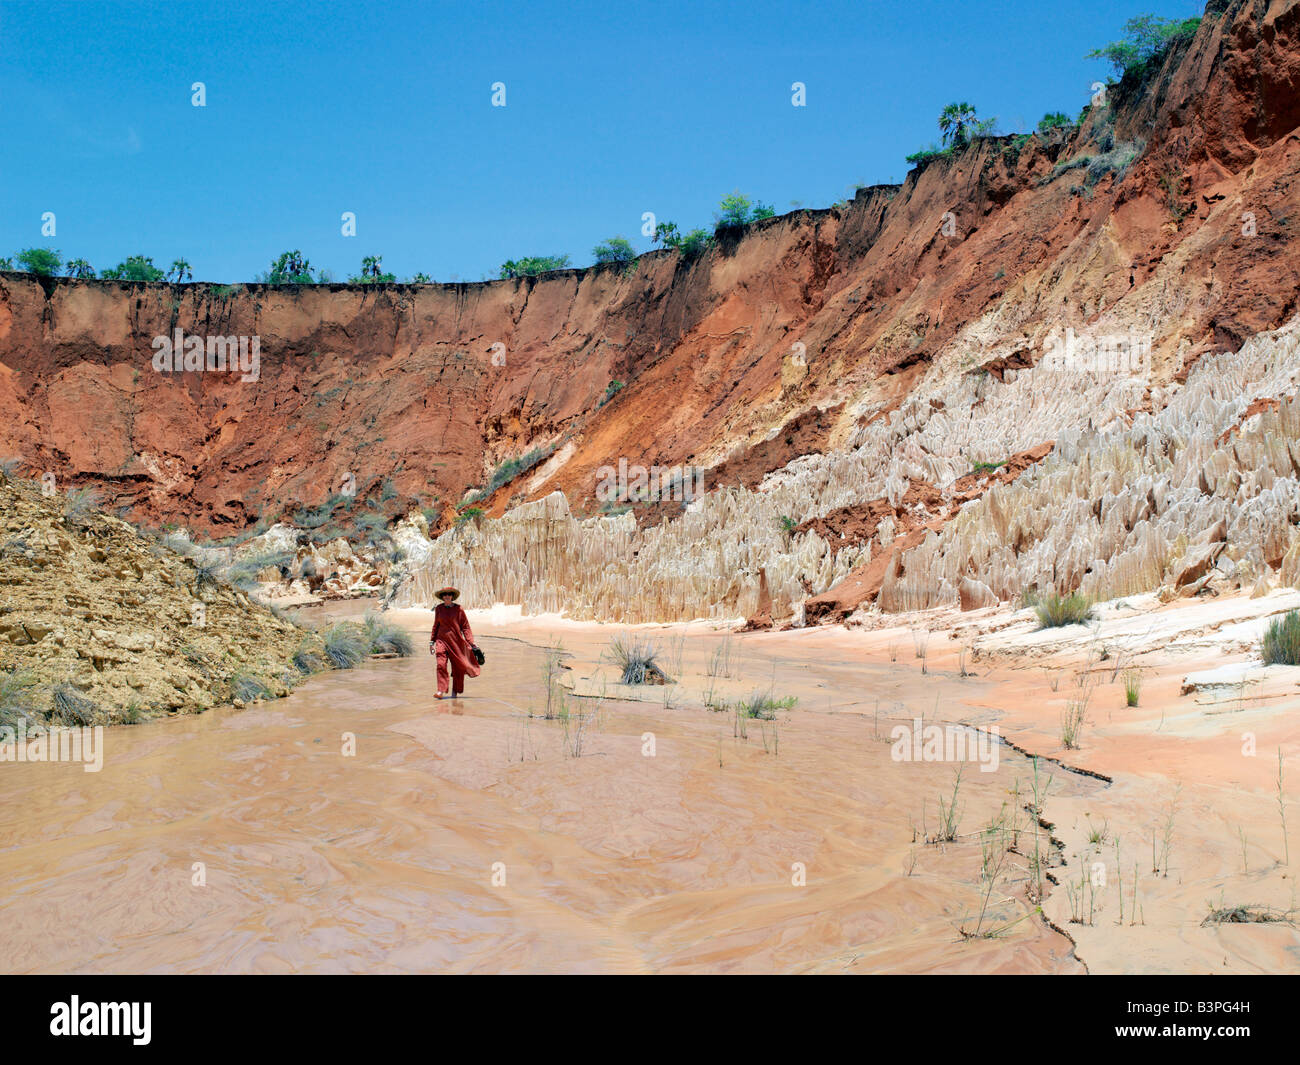 Northern Madagascar, A lady visitor walks down a ravine of ancient rock formations at Irodo, southeast of Antsiranana (Diego Suarez). The impressively sharp pinnacles of karst sandstone, known in Madagascar as tsingy, are a feature of this ravine.Tsingy is a Malagasy word meaning 'walking on tiptoe'. Stock Photo